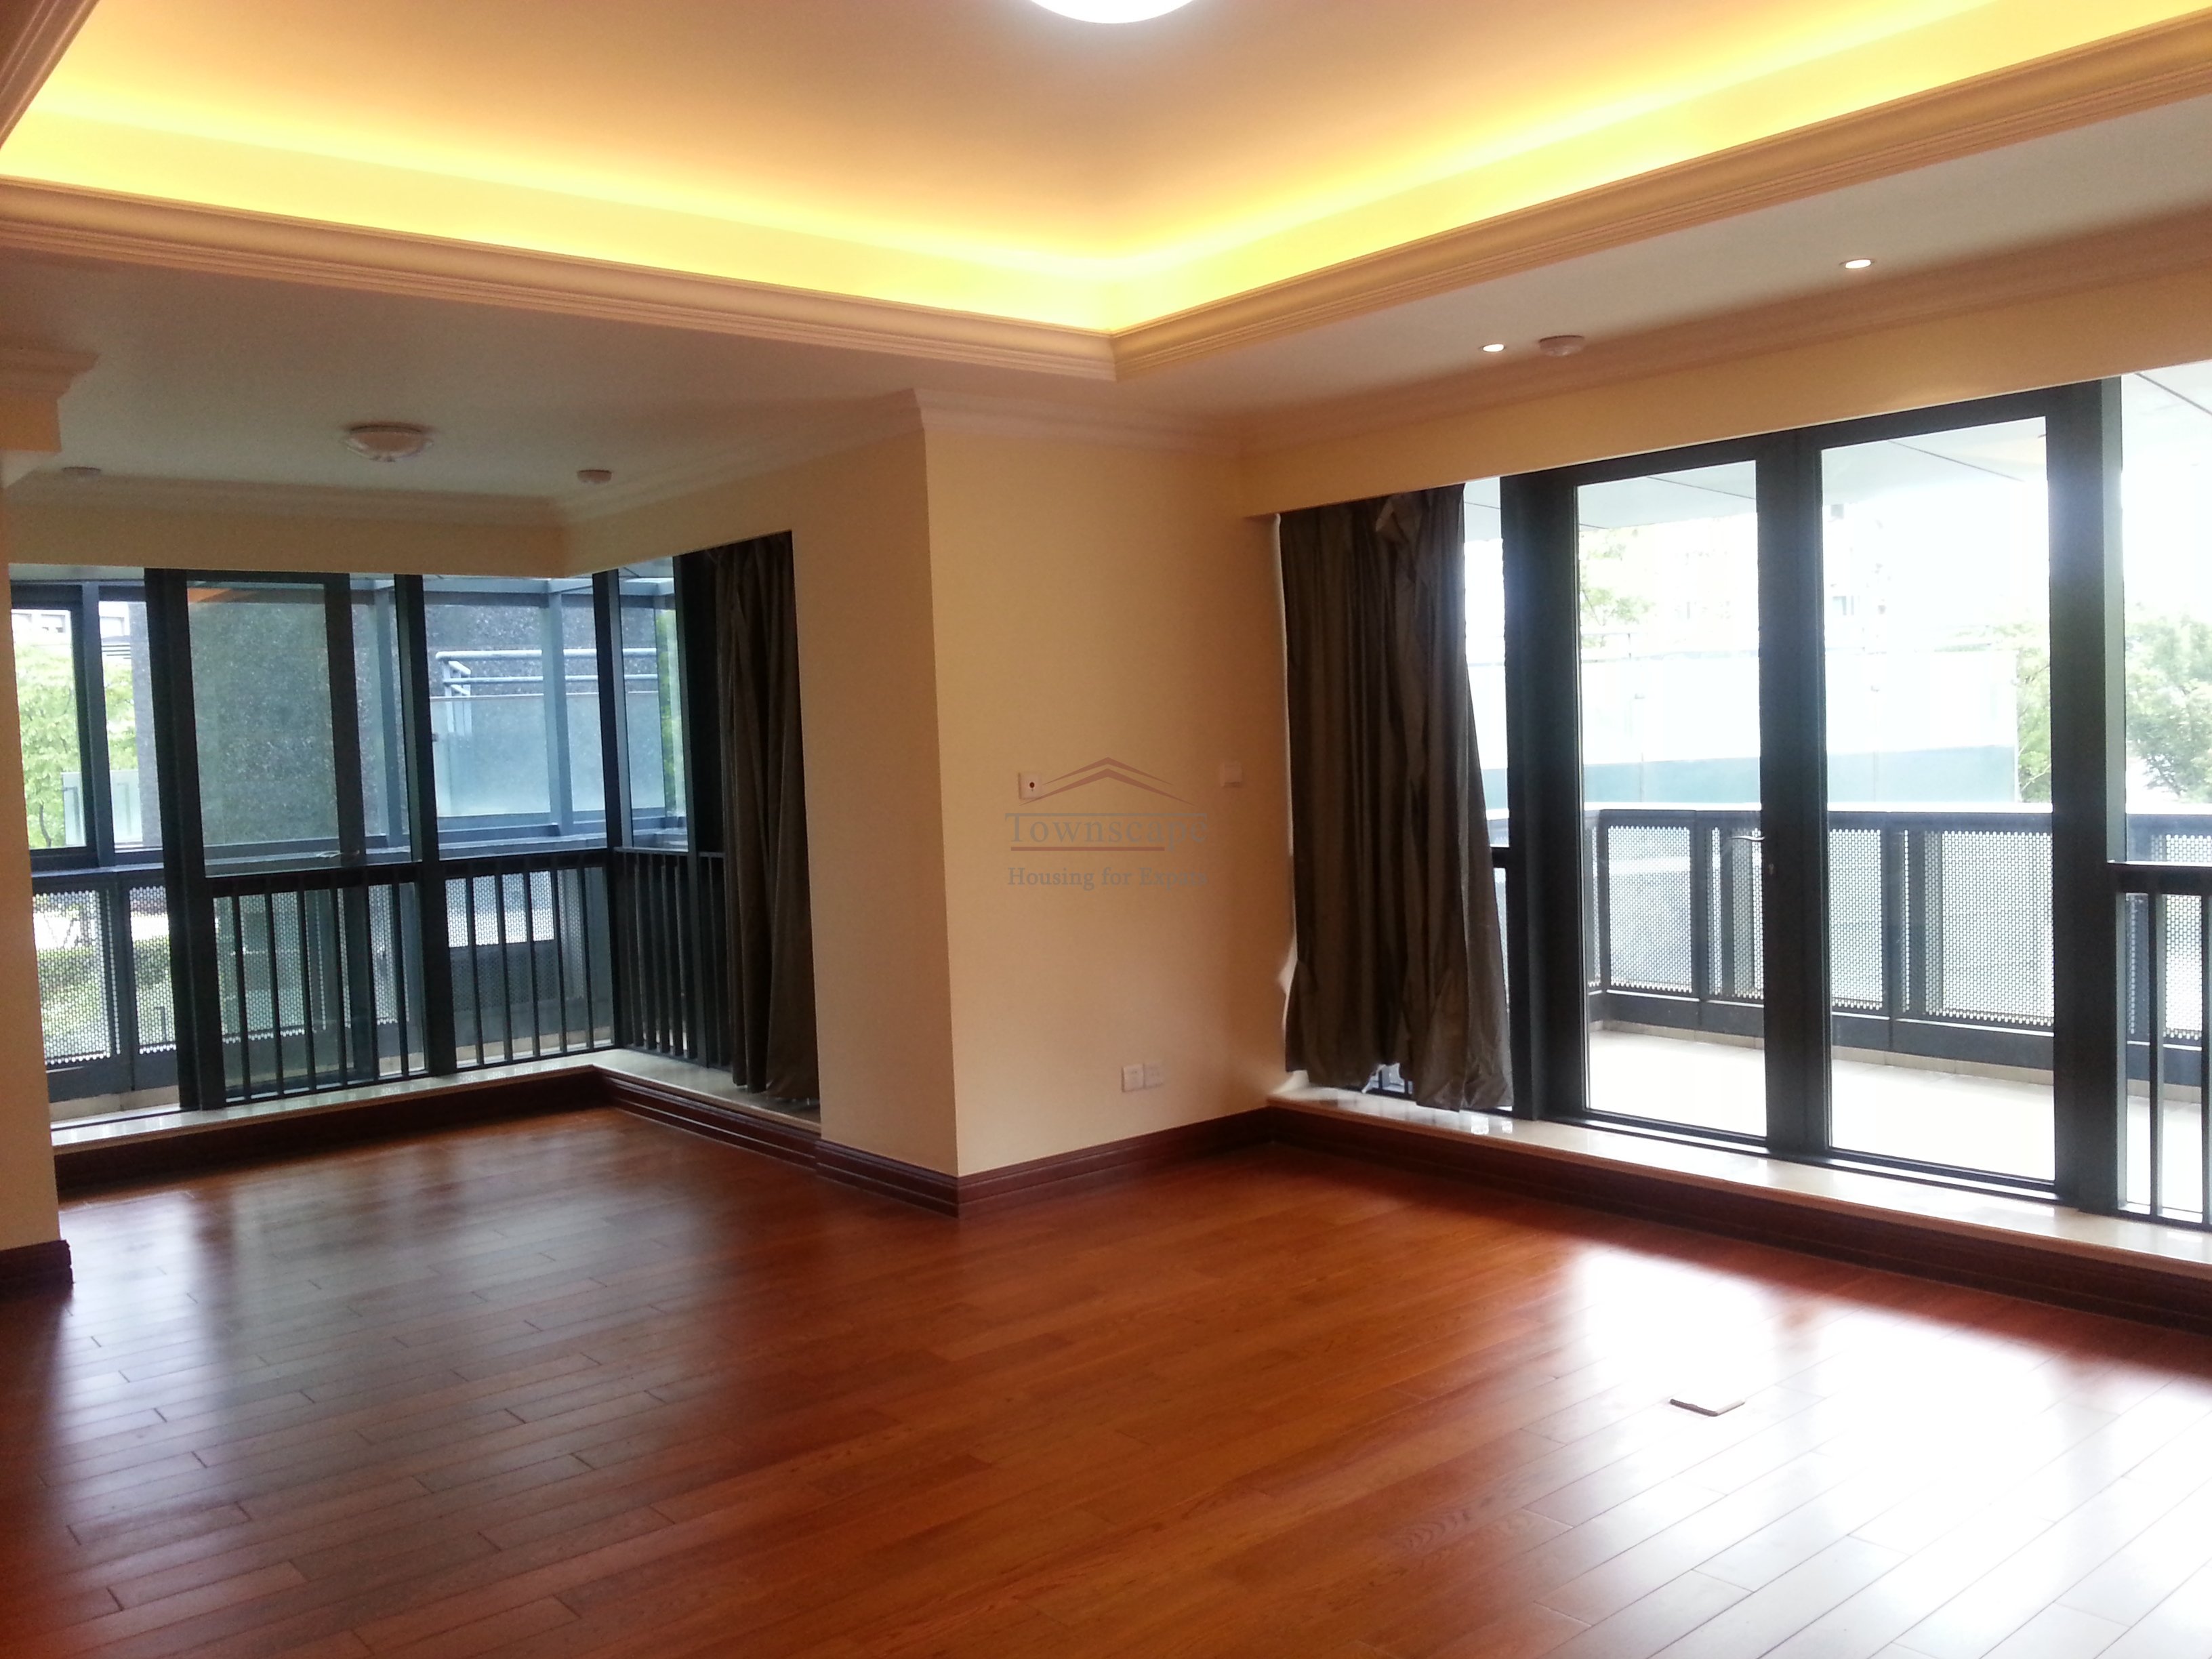 rent floor heating apartment shangahi 2Br apartment with grand hall and floor heating system Gubei